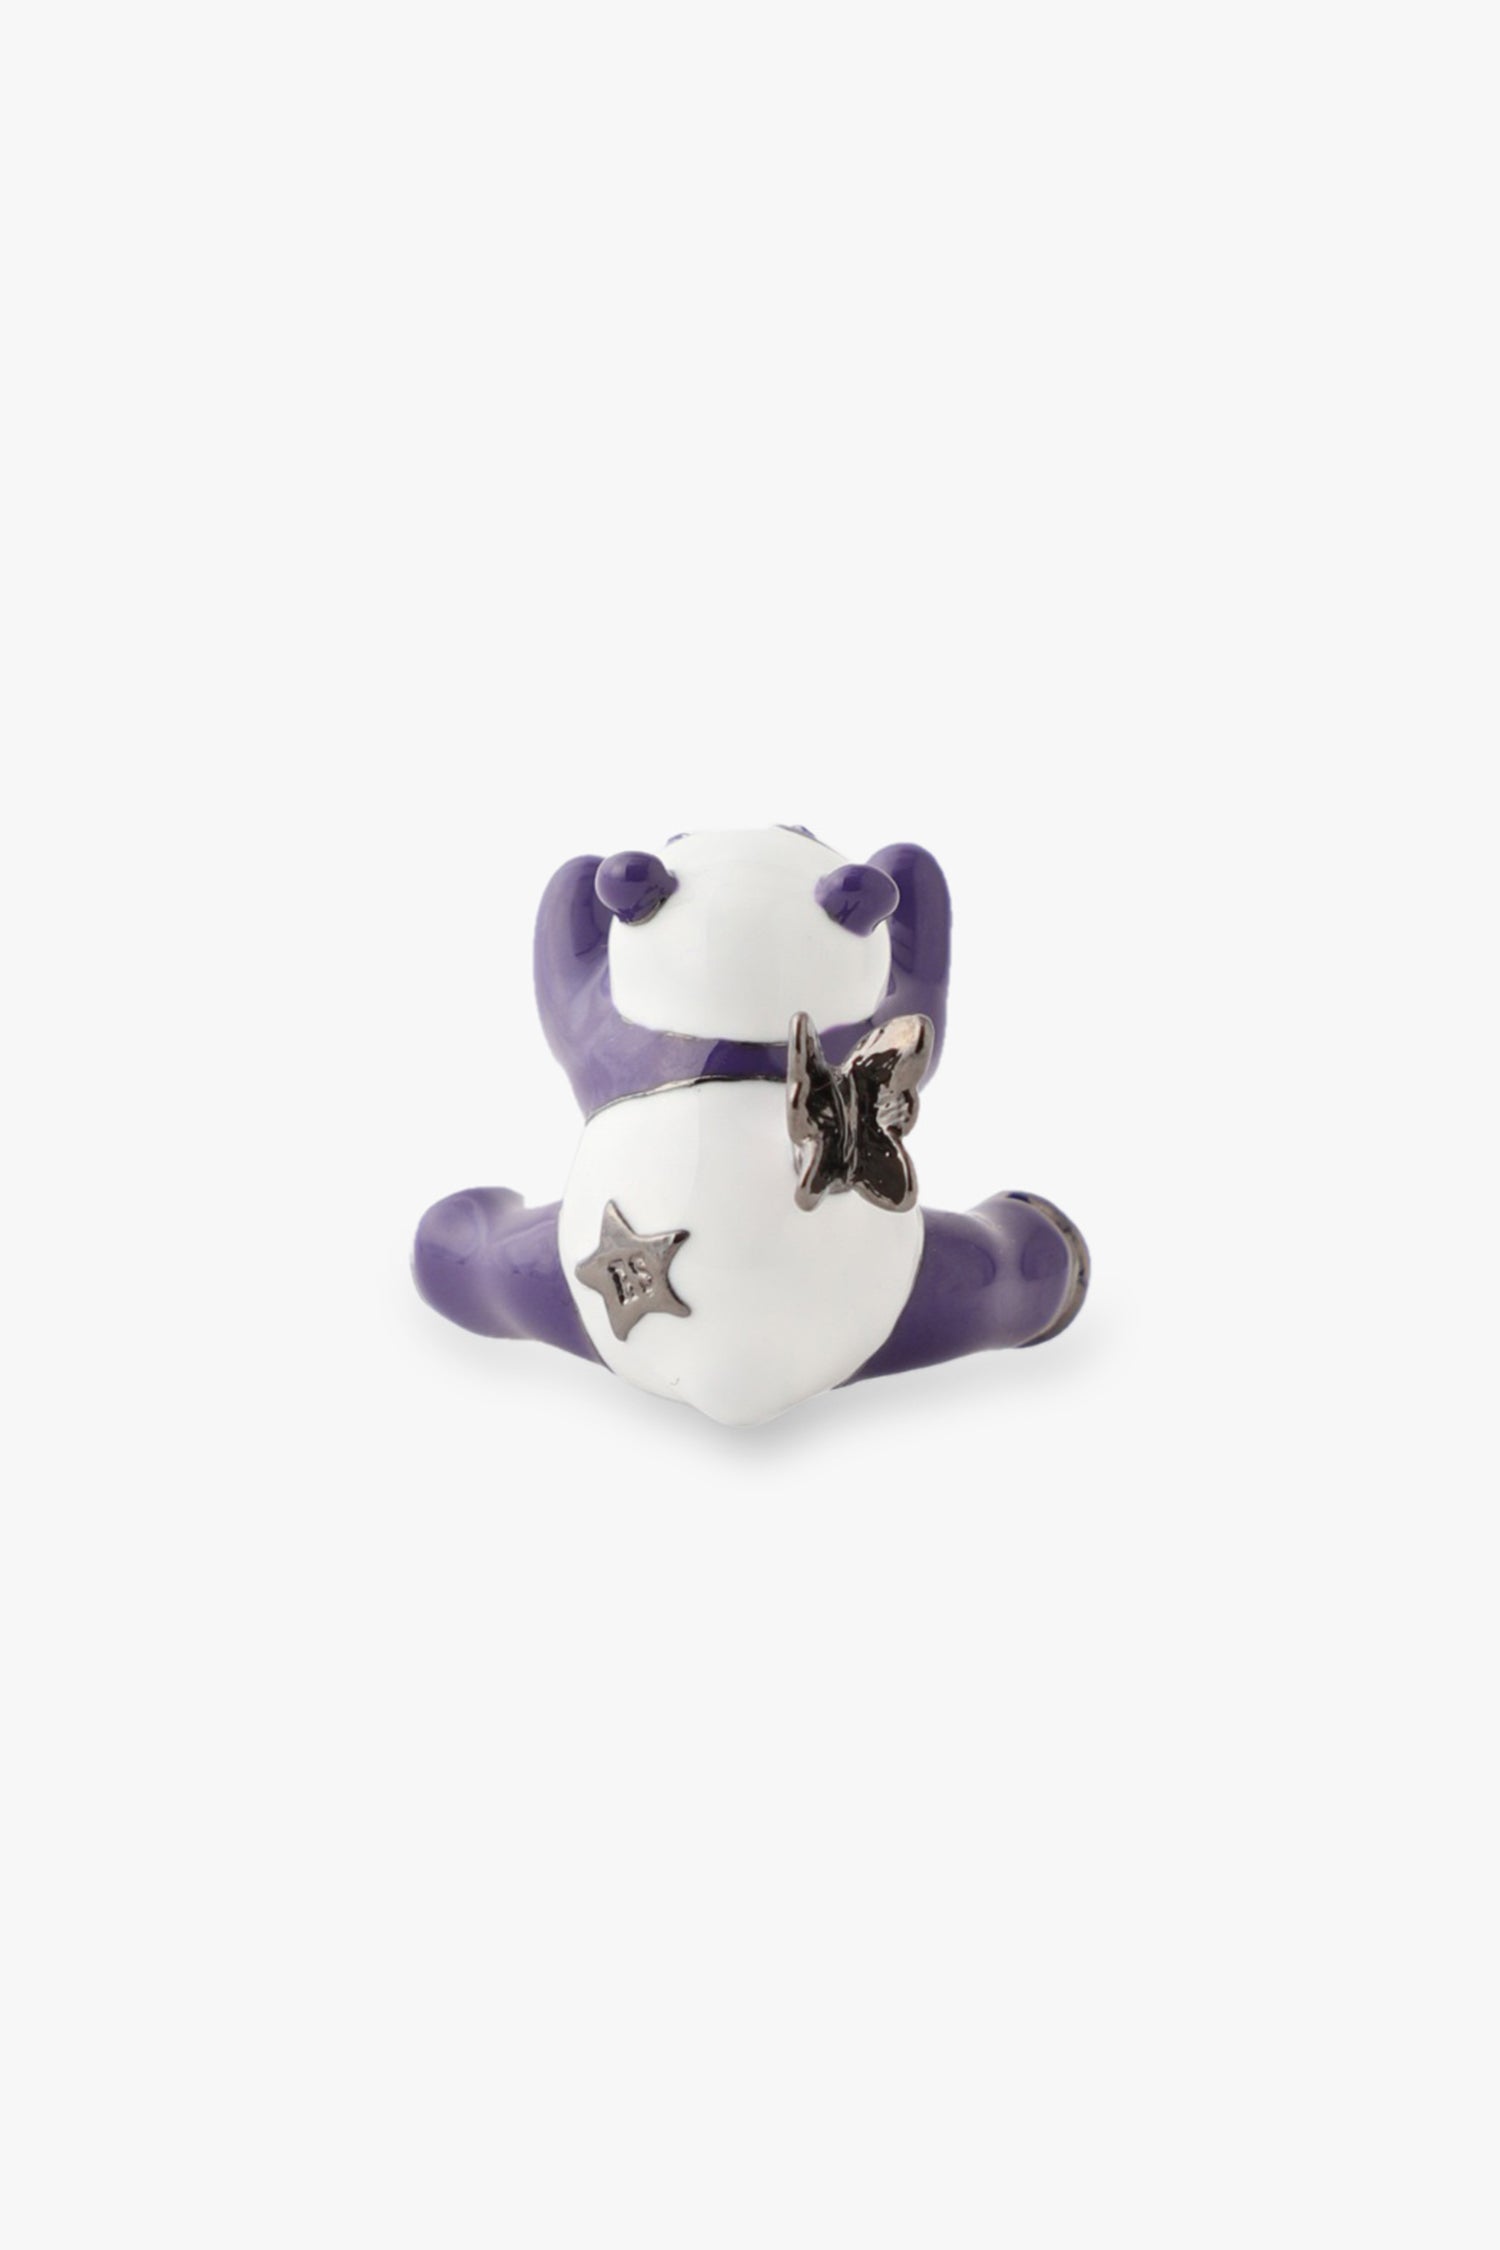 White/purple panda, on Gunmetal Ring a butterfly on its back, and a silver star with AS label